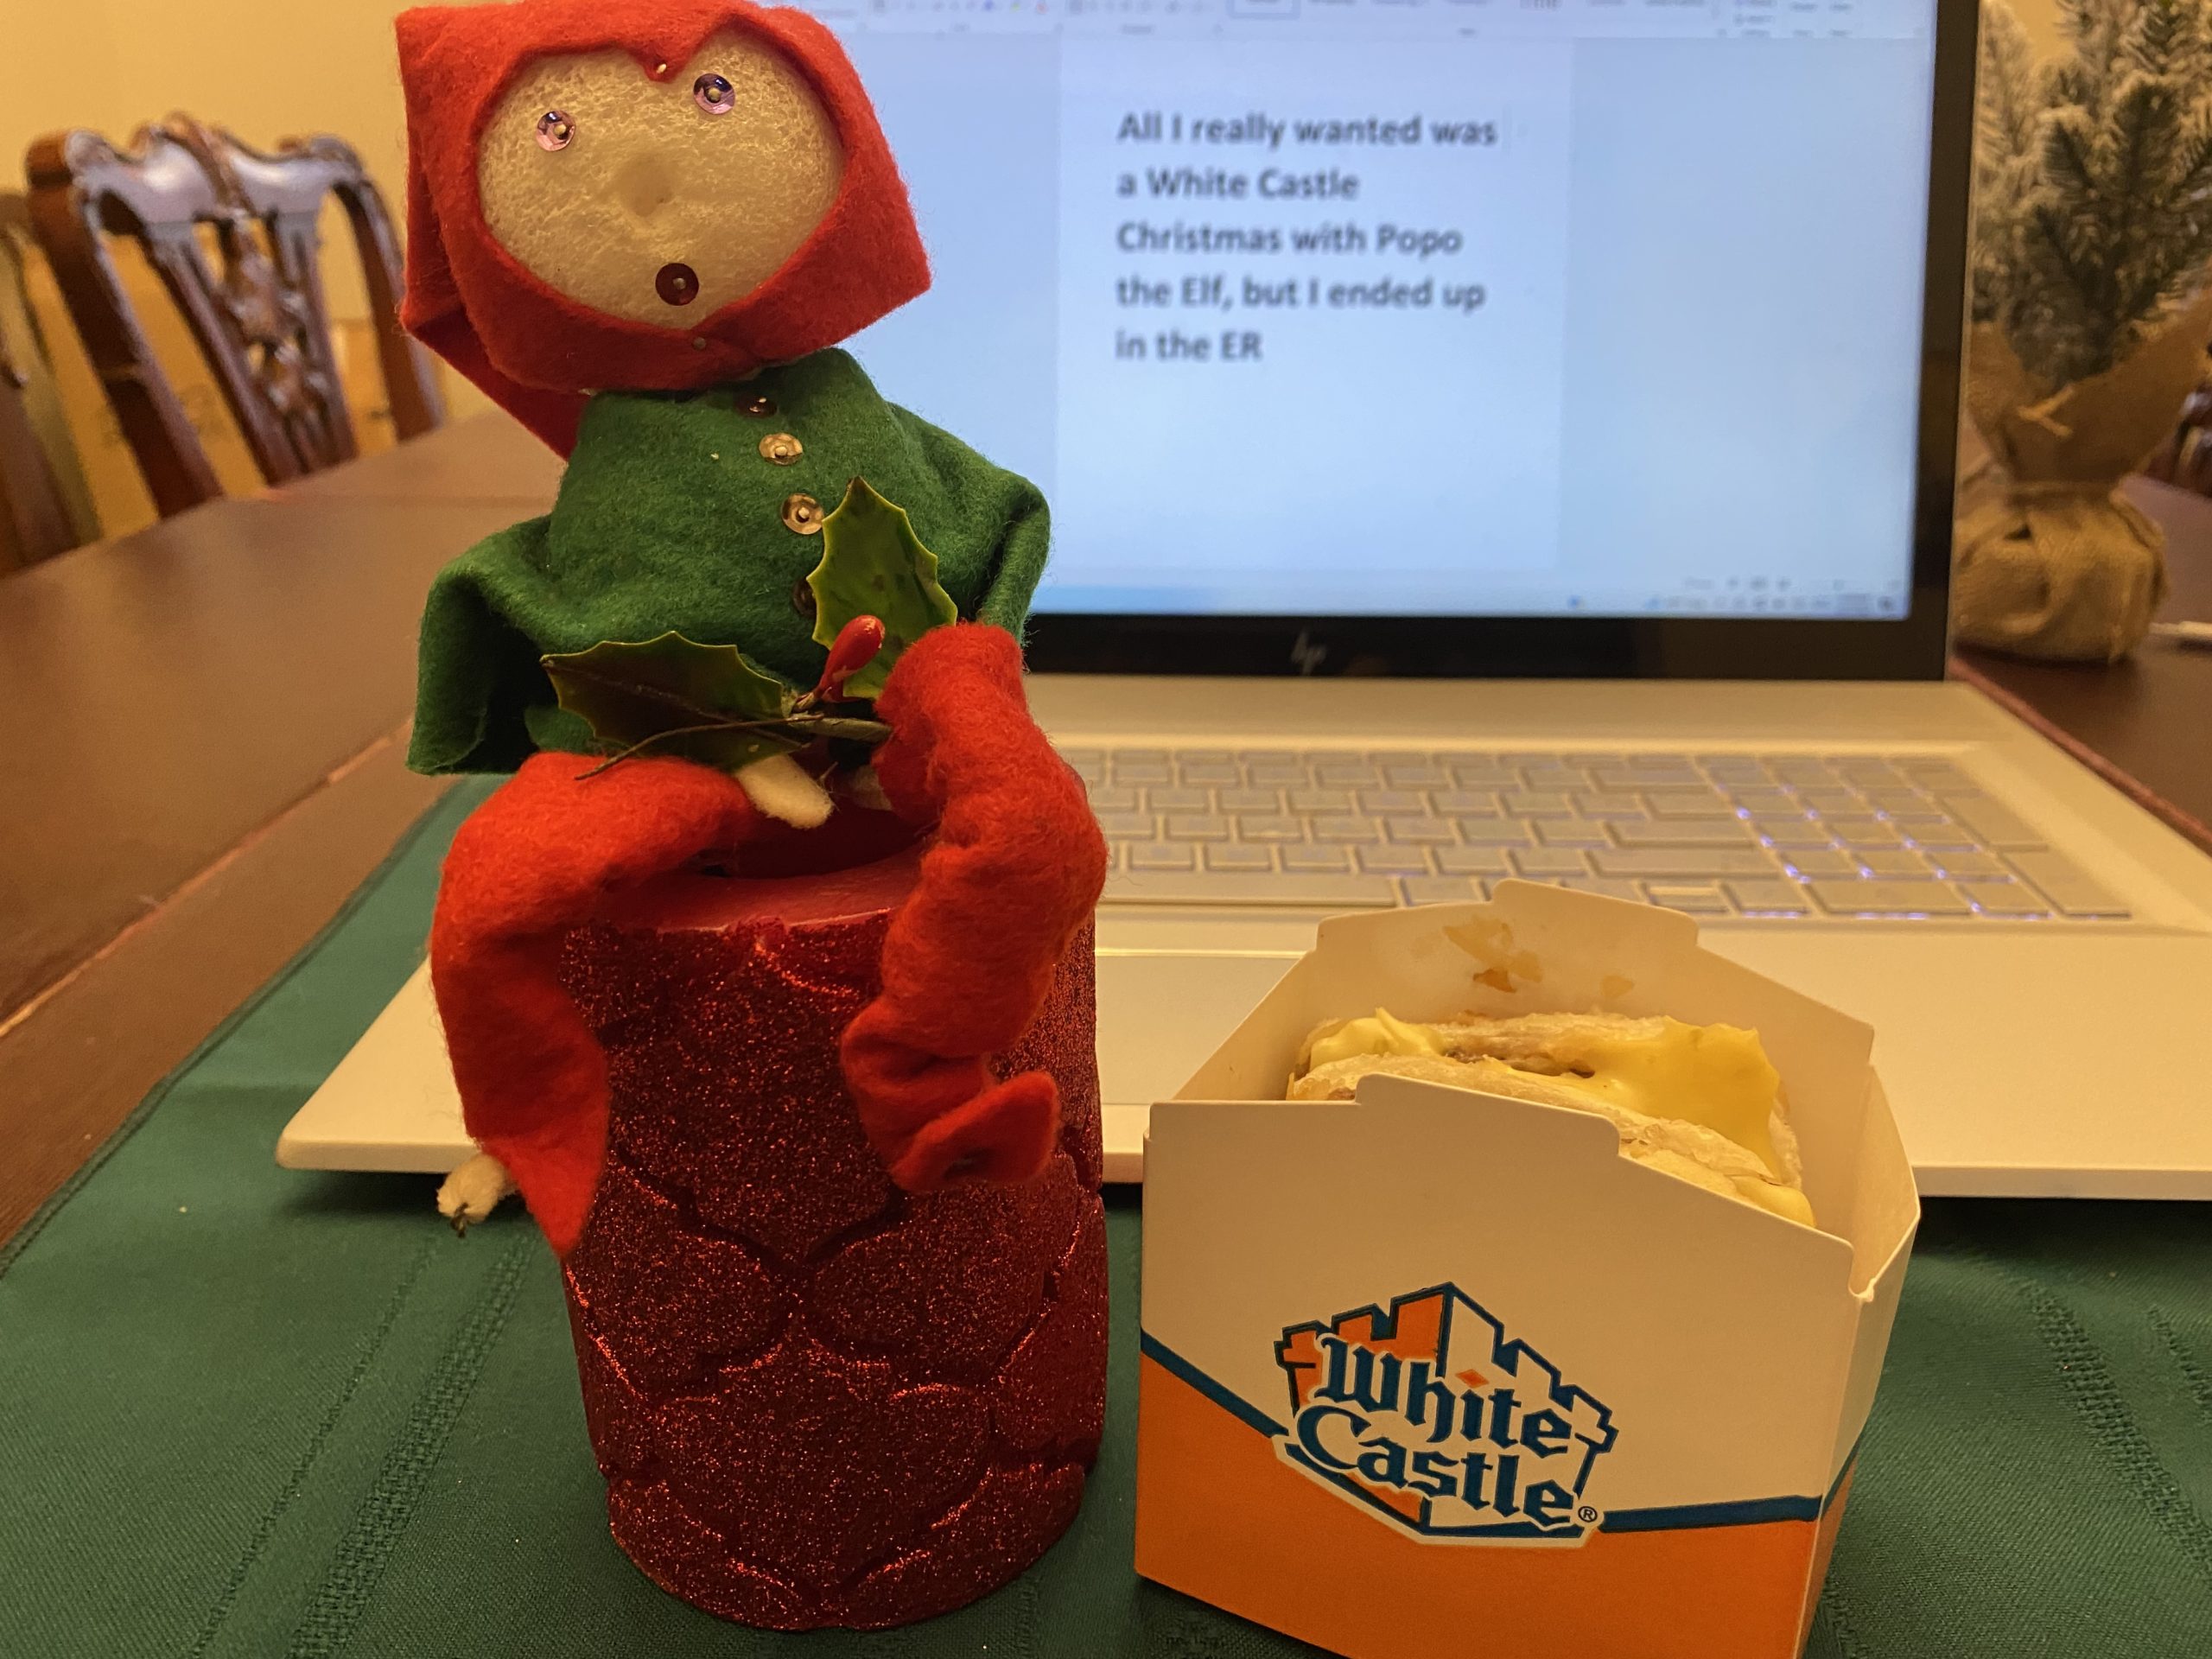 Featured image for “All I really wanted was a White Castle Christmas with Popo the Elf, but I ended up in the ER”